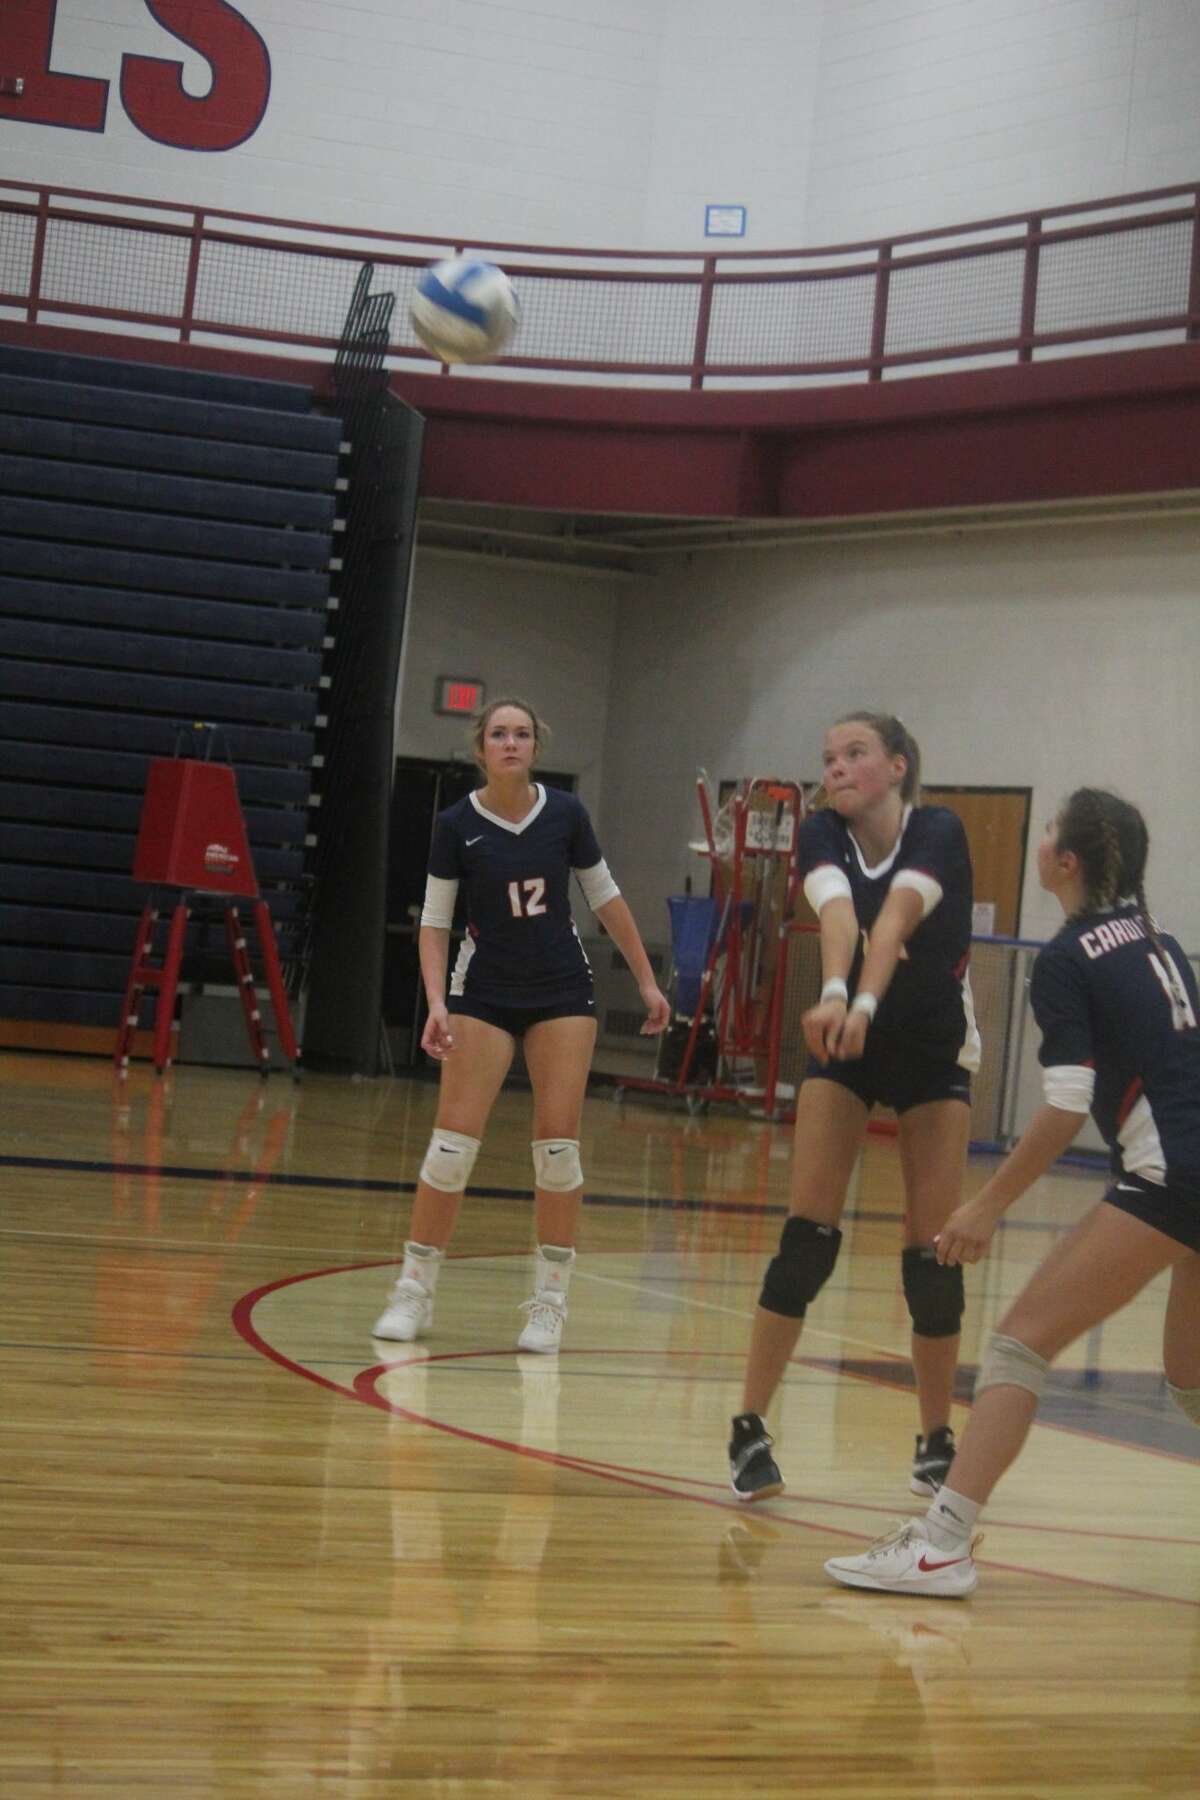 Big Rapids dropped its first volleyball home match of the season to Fremont 3-0